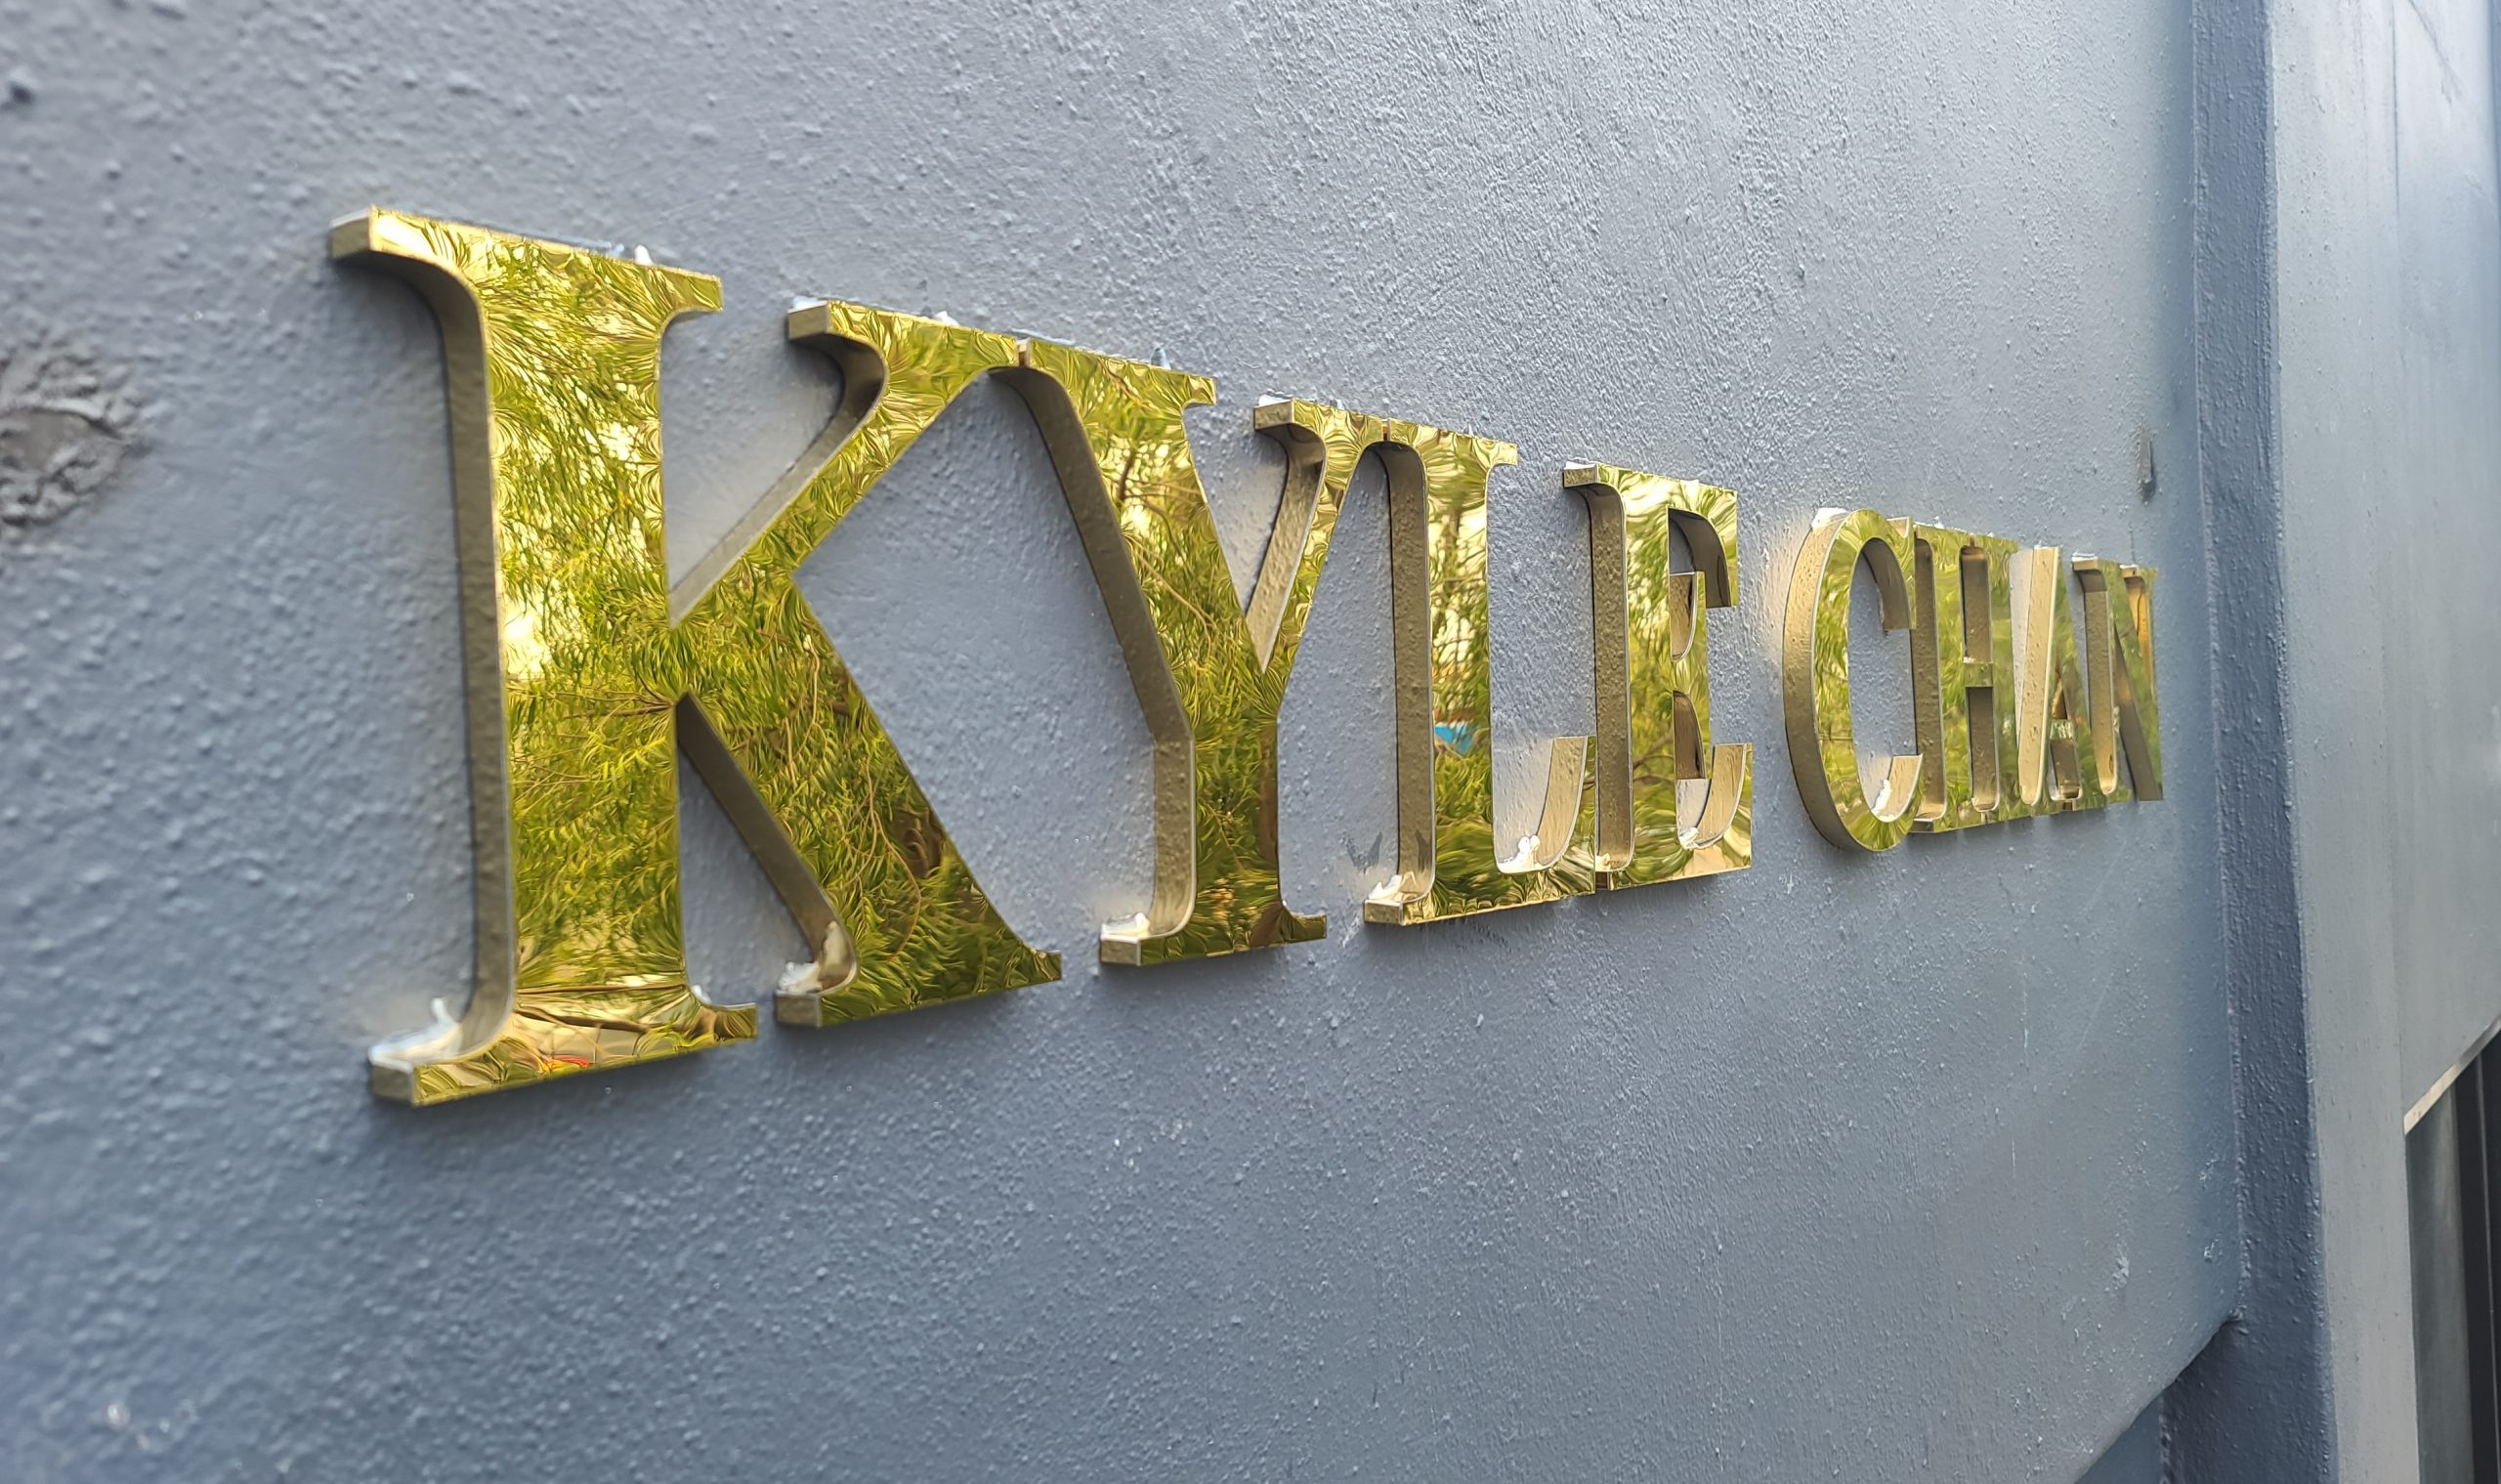 Dimensional letters for Kyle Chan, boutique storefront sign for their West Hollywood branch that is certainly visually stunning. 